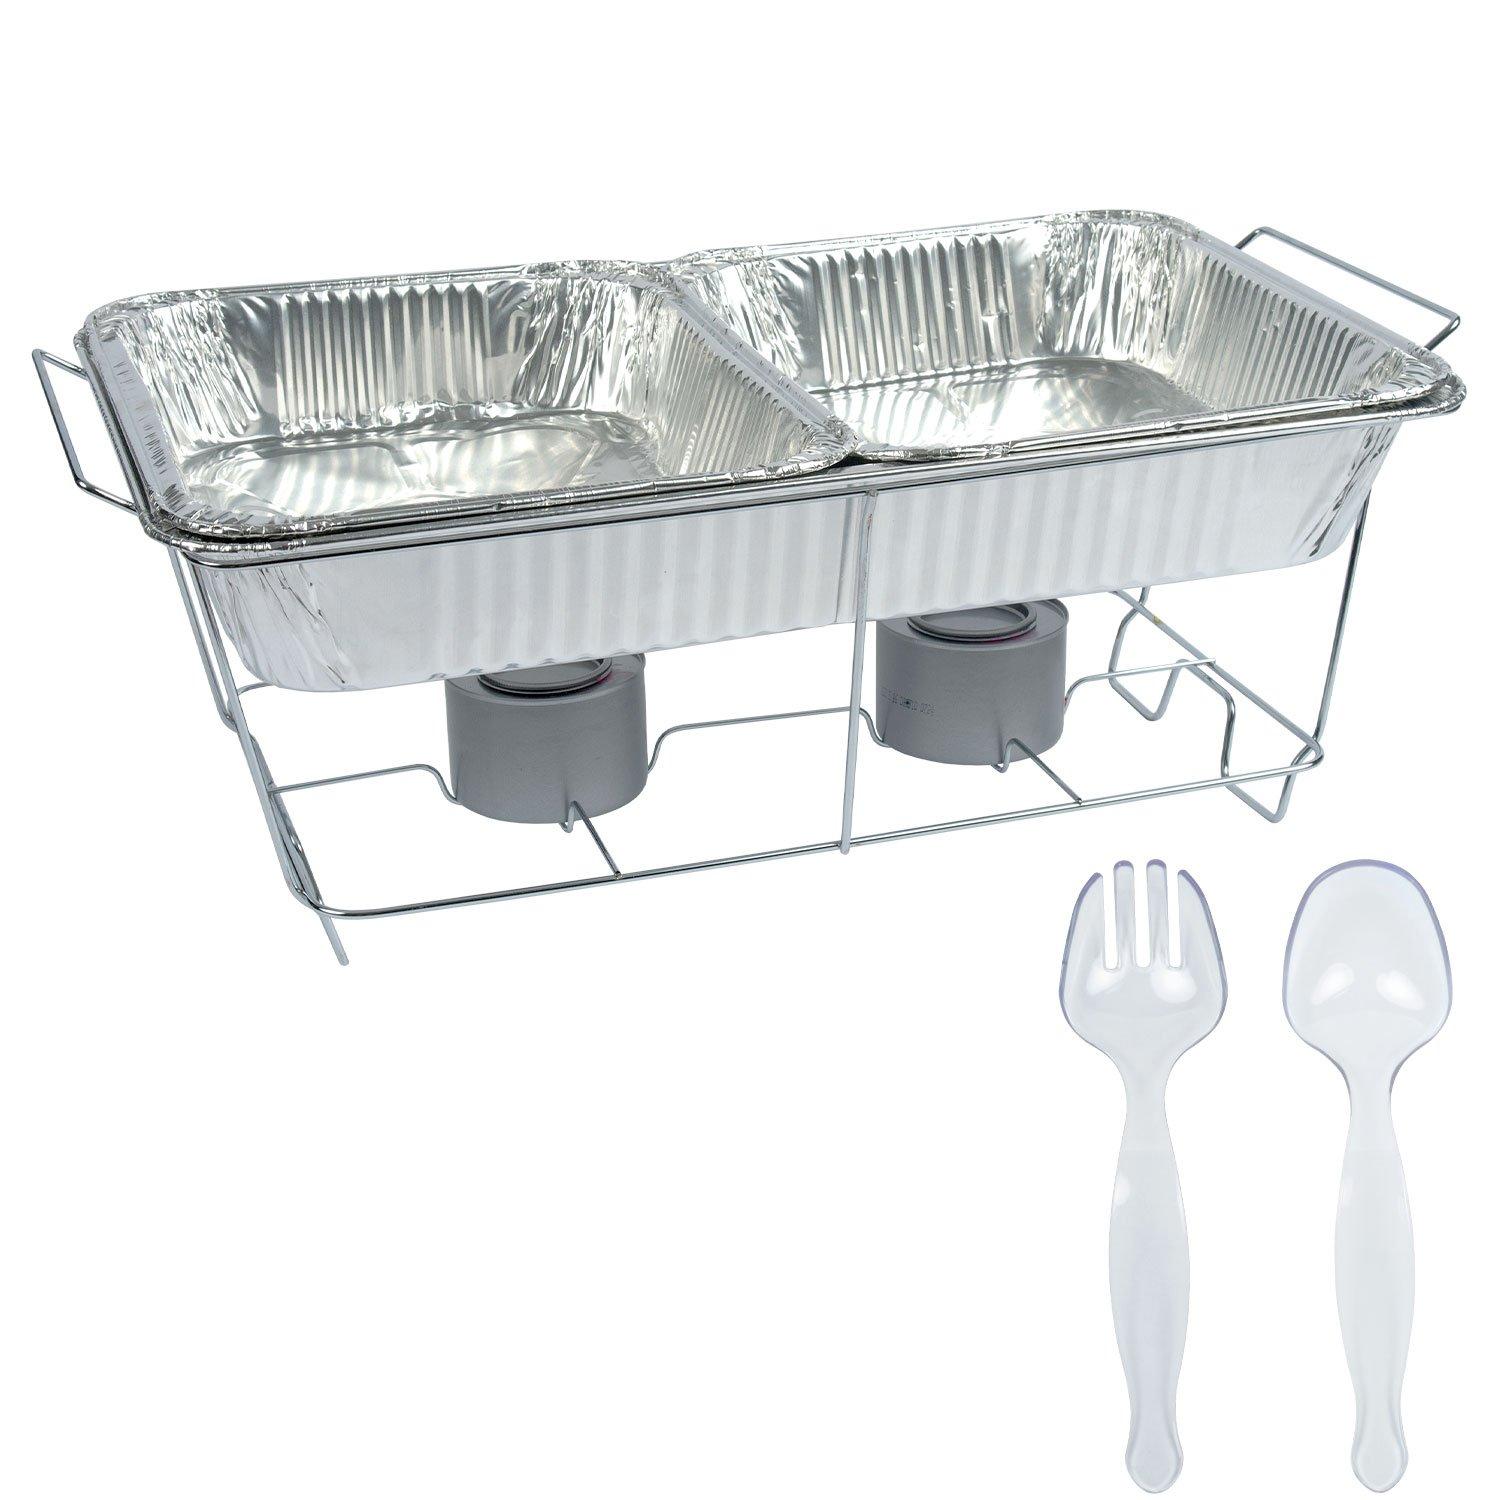 Party Dimensions 8-Piece Chafing Dish Buffet Set | Party City 271575